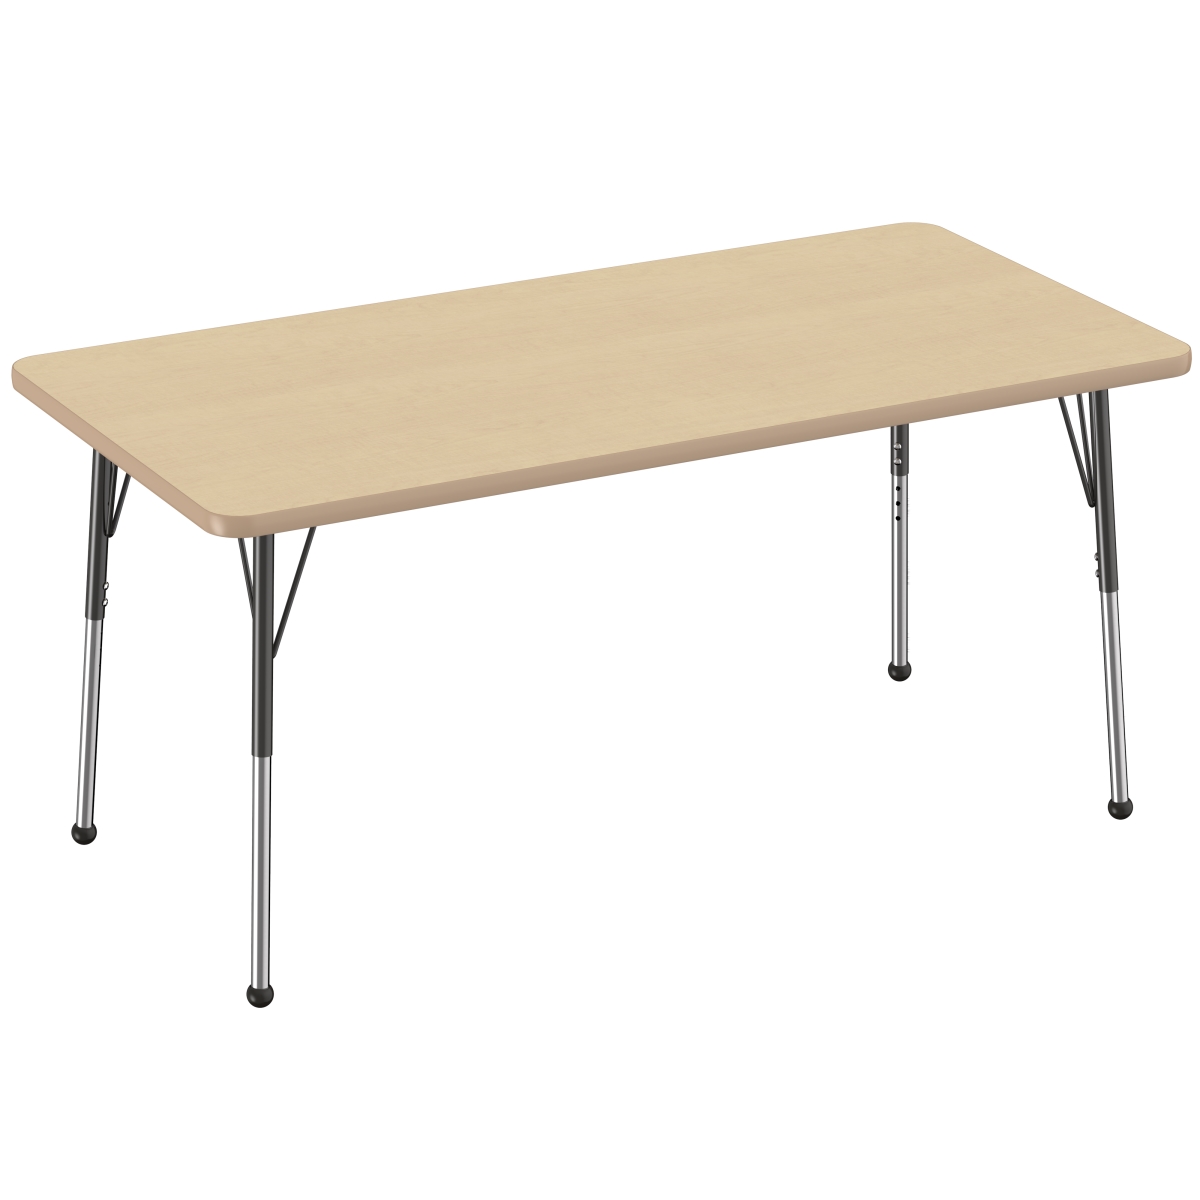 10024-mpmp 30 X 60 In. Rectangle T-mold Adjustable Activity Table With Standard Ball - Maple